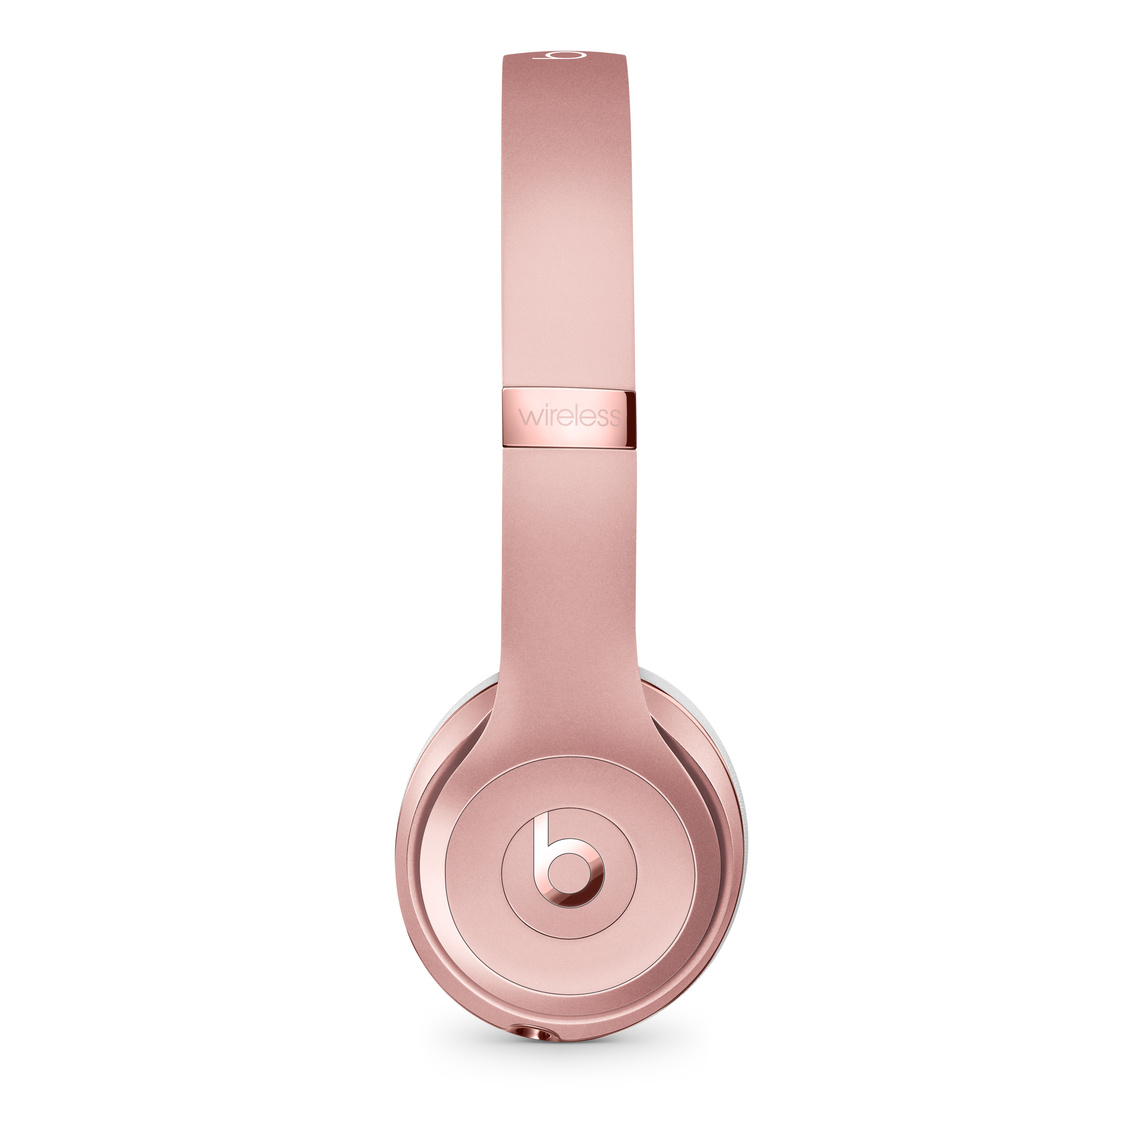  - Audifono On Ear bluetooth Solo 3 Beats Rose Gold 2